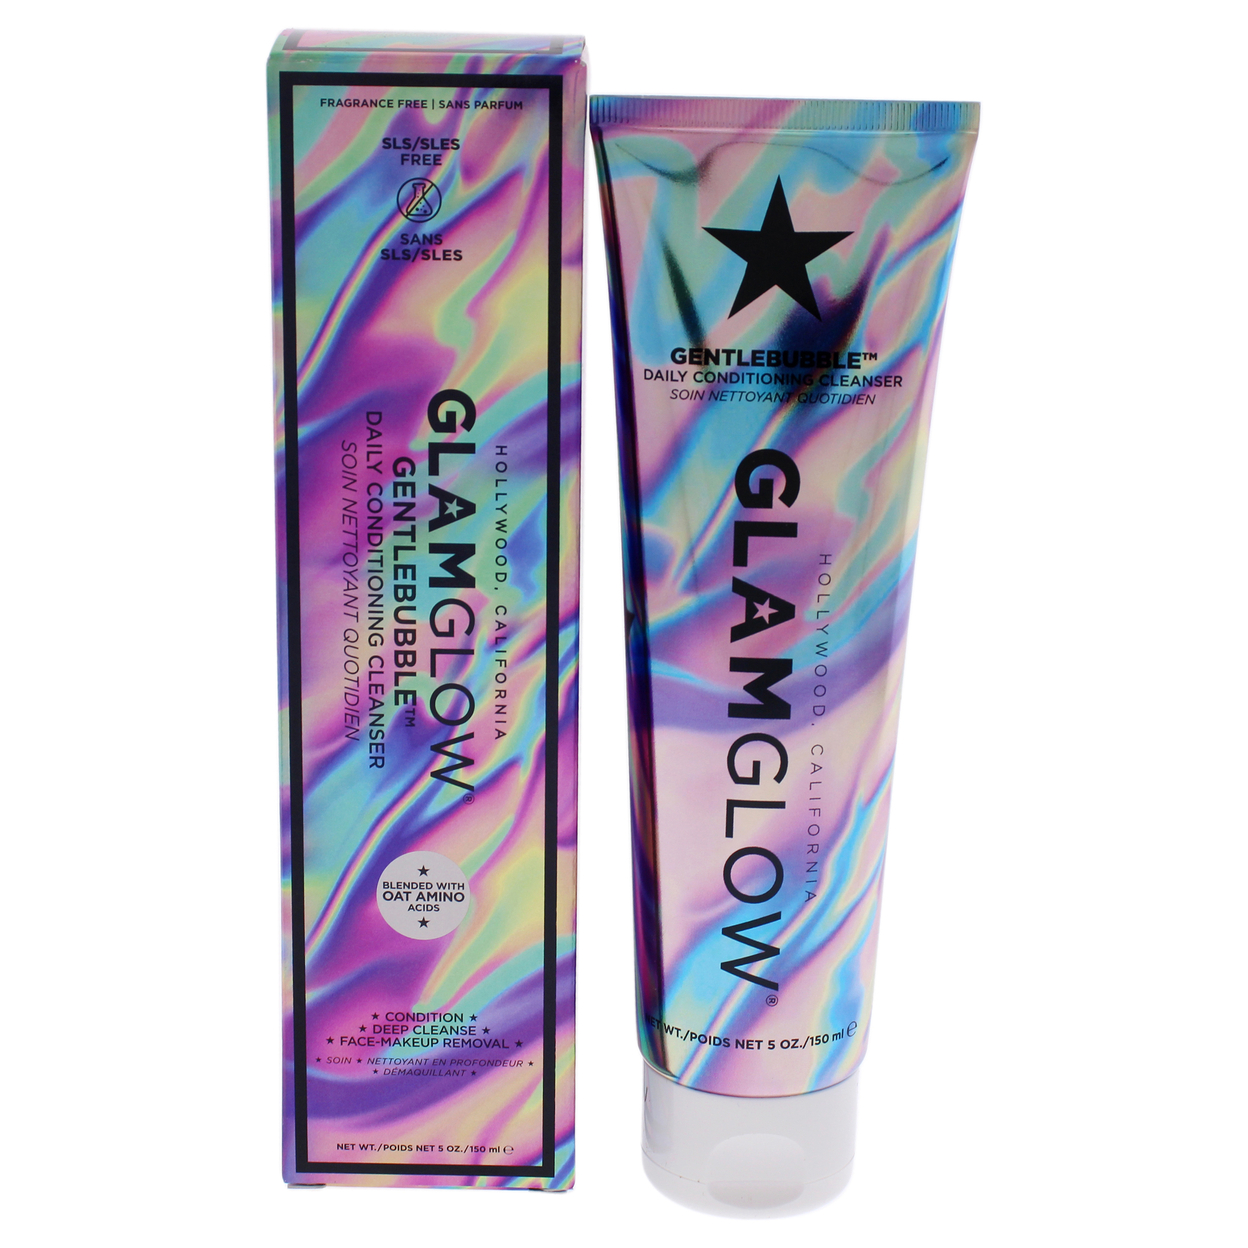 Glamglow Women SKINCARE Gentlebubble Daily Conditioning Cleanser 5 Oz